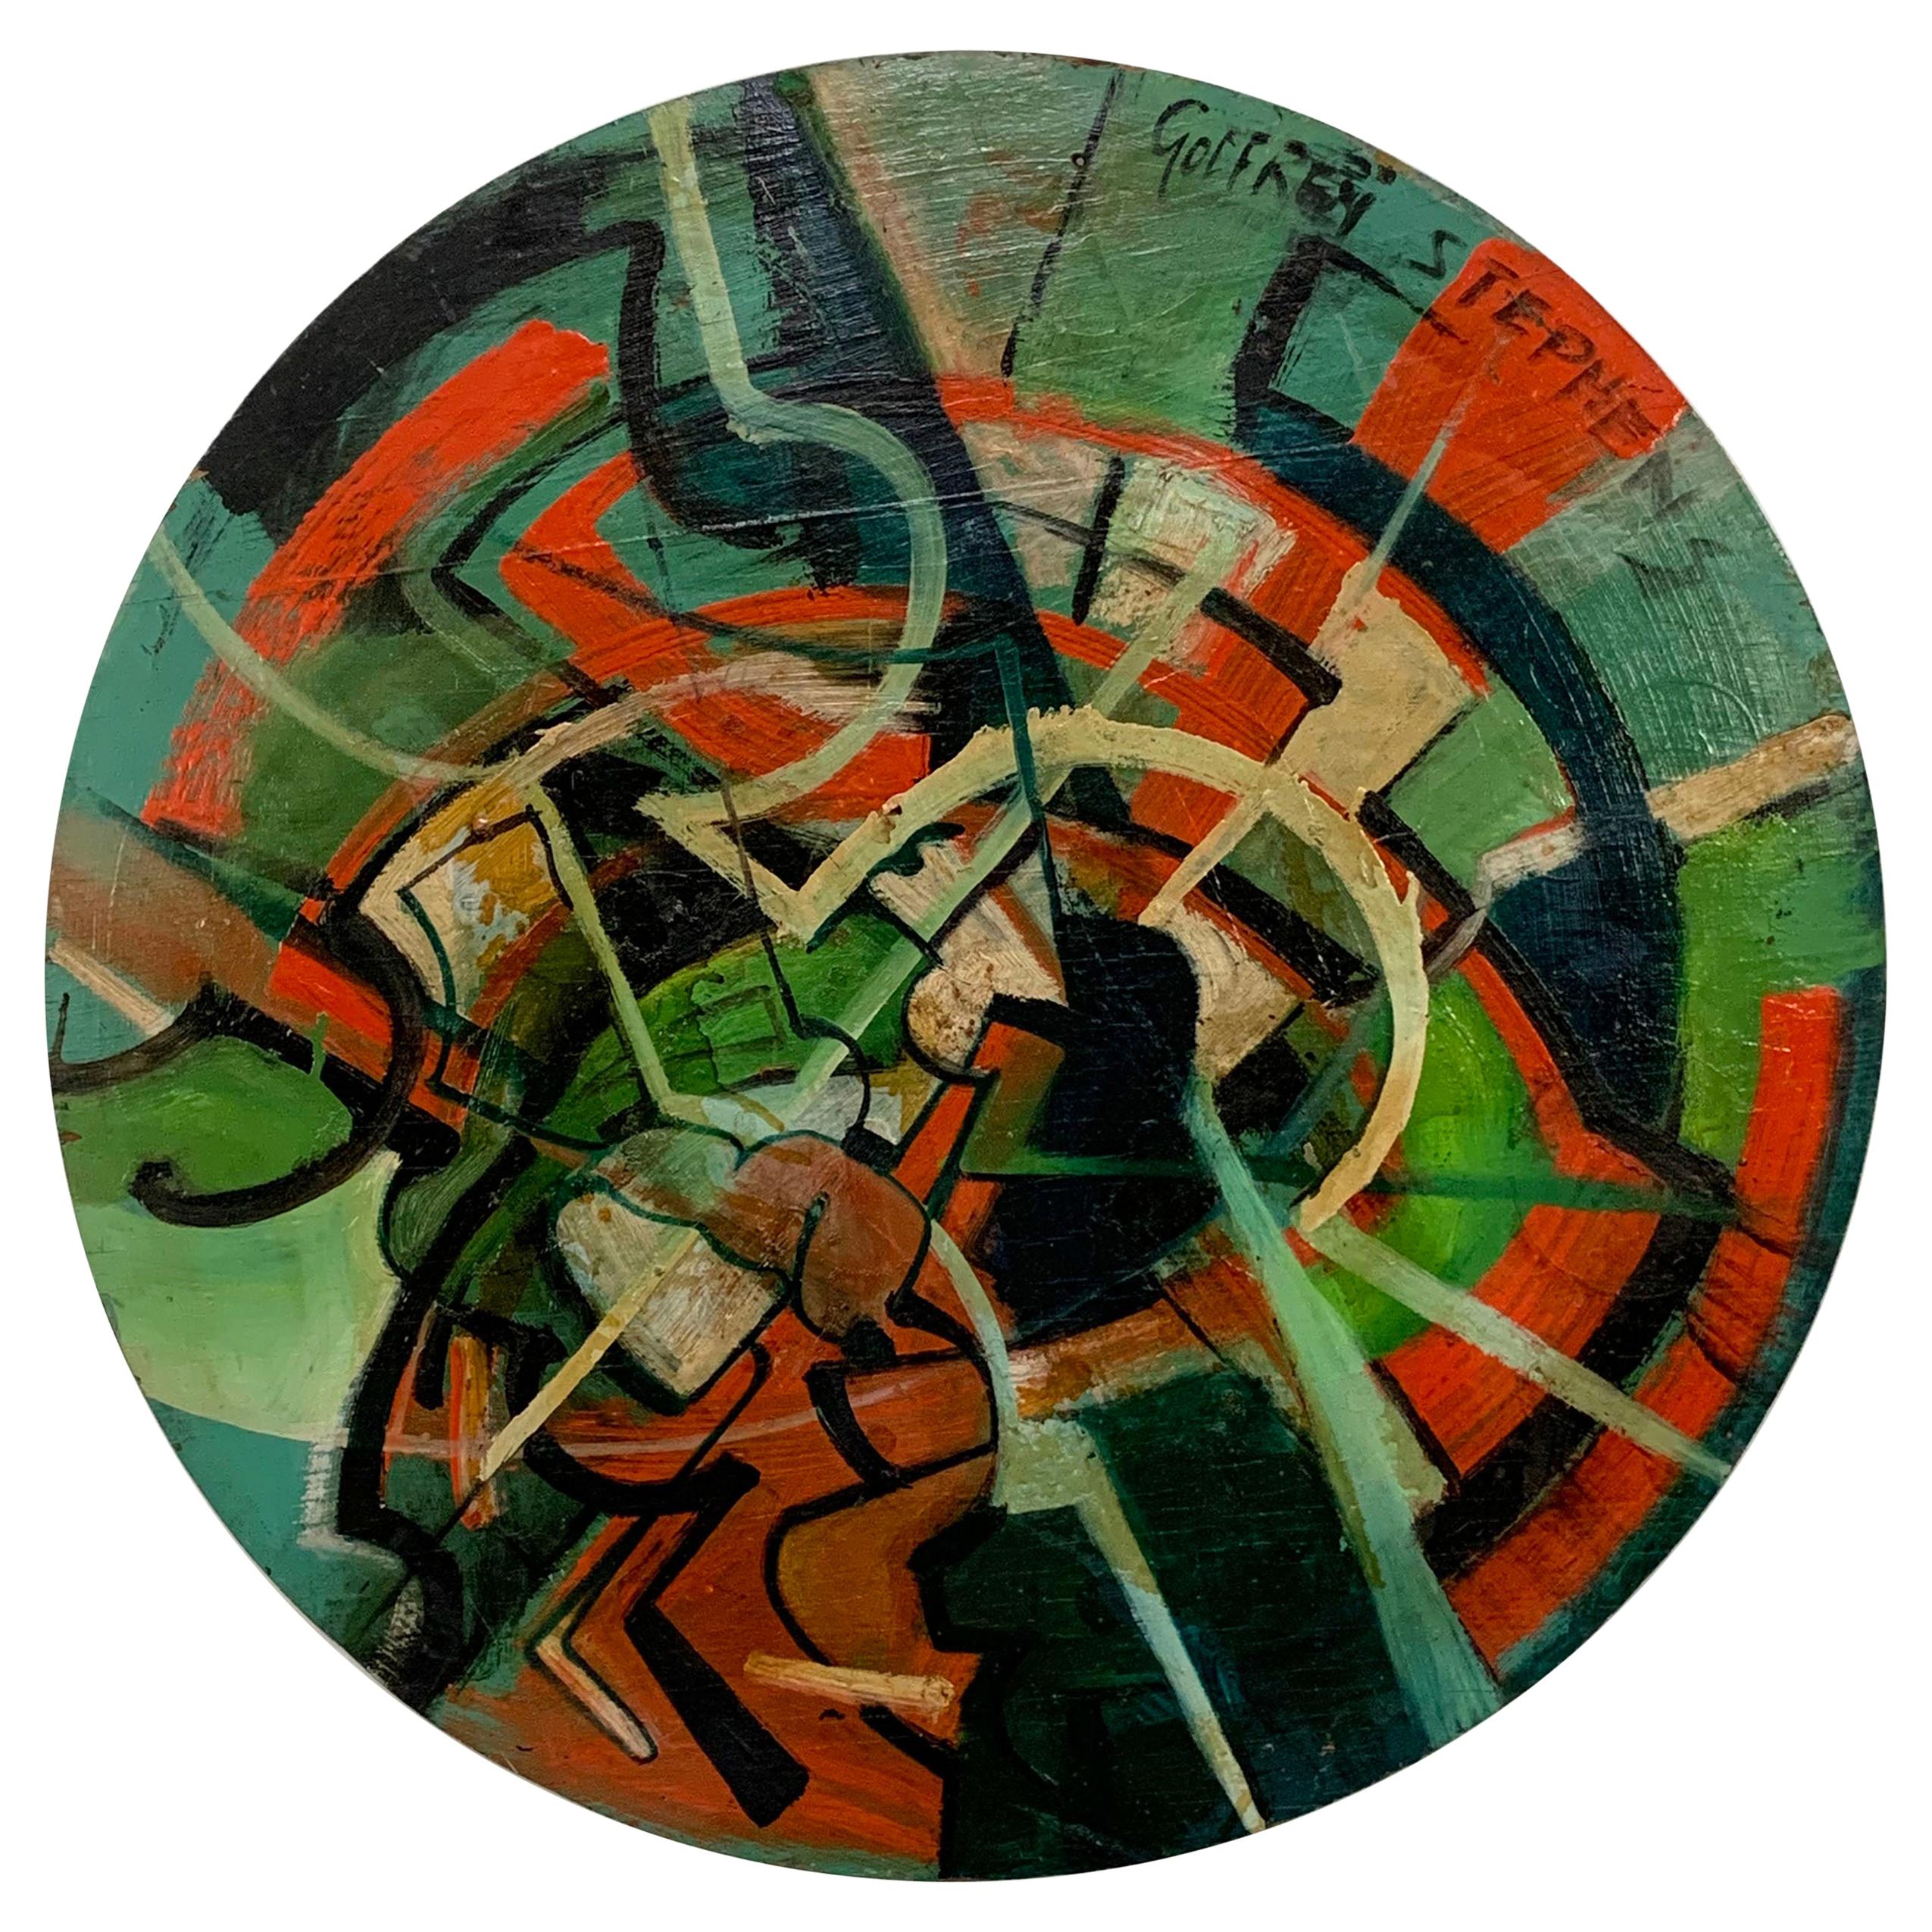 Modernist Abstract Tondo Painting by Godfrey Stephens, d. 1965